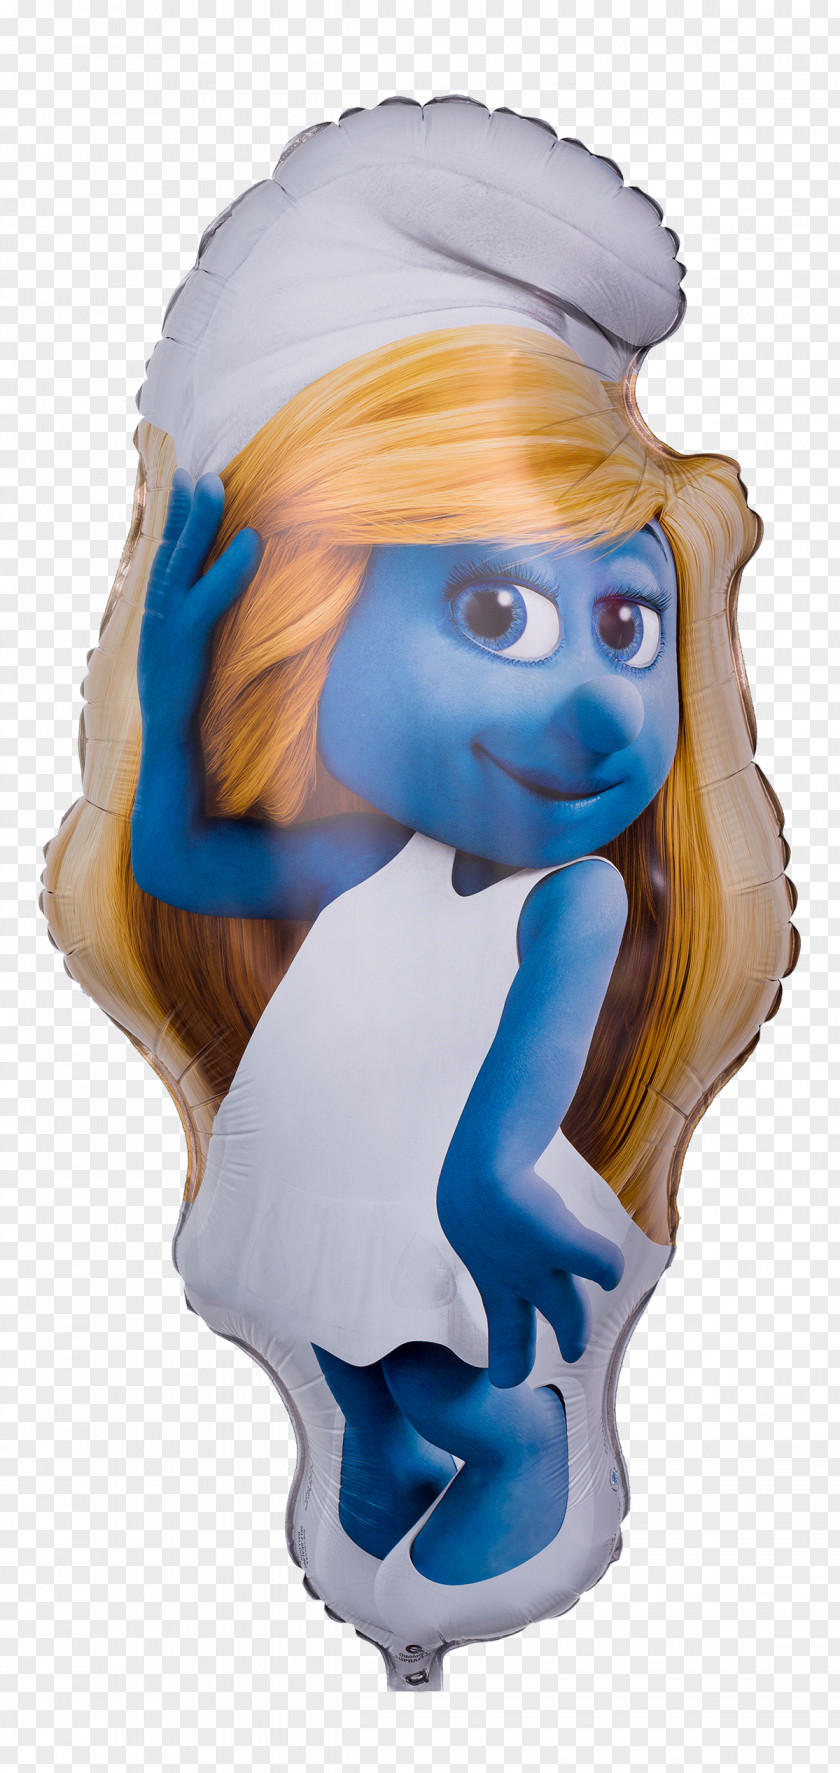 Balloon The Smurfette Toy Gift Child PNG